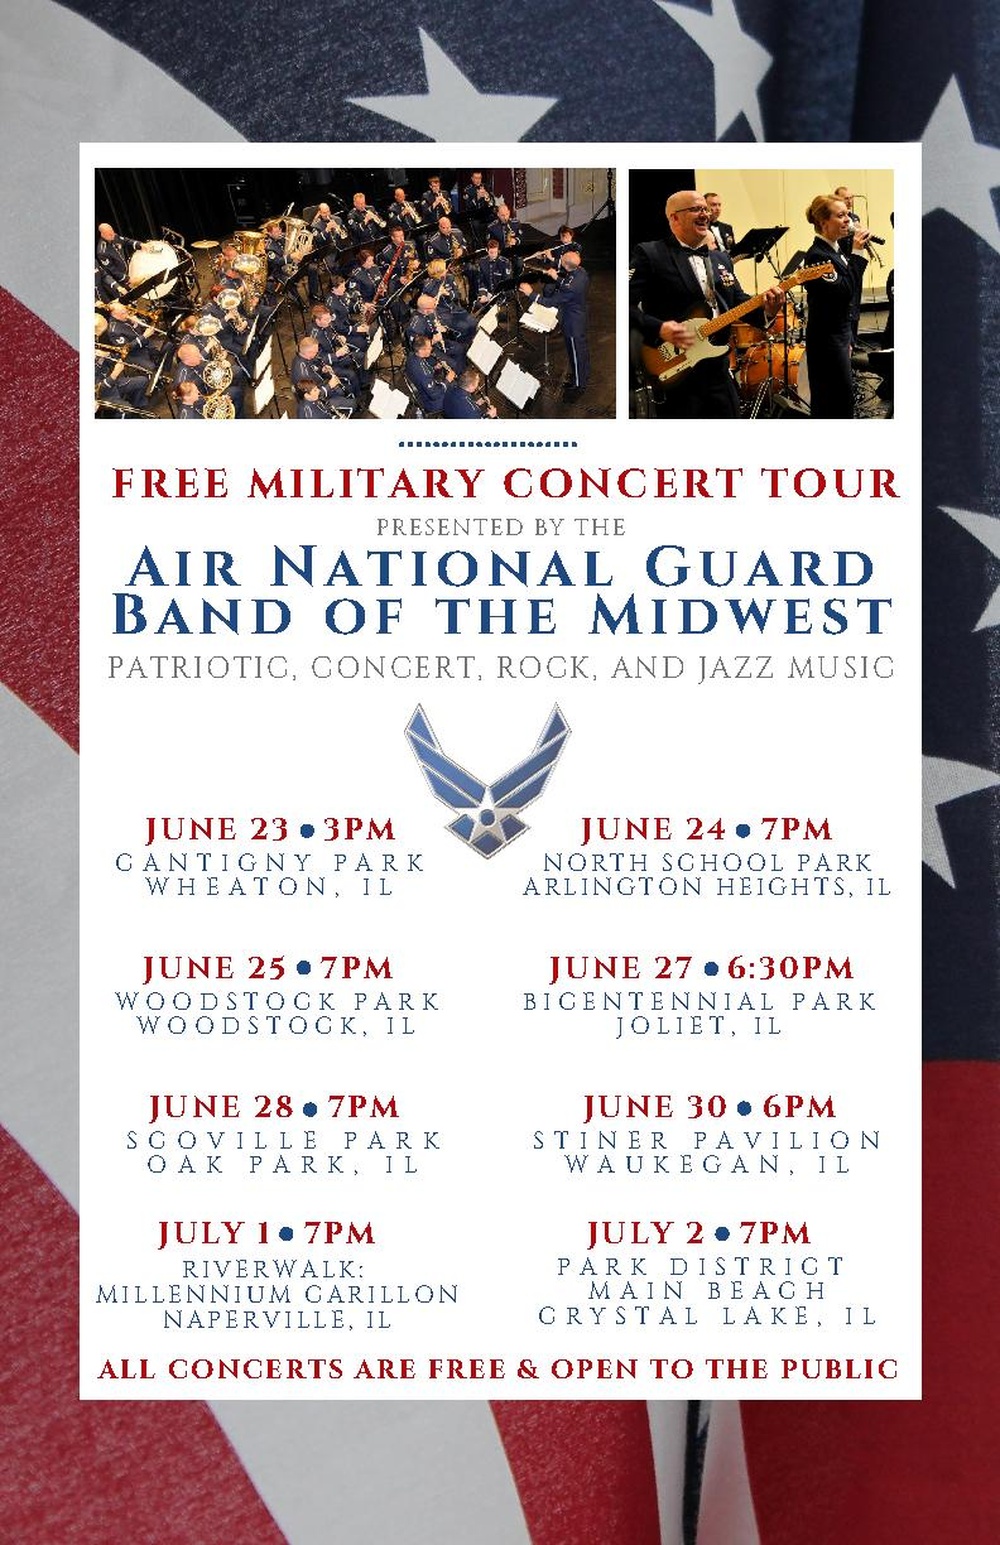 Air National Guard Band of the Midwest to perform free patriotic concerts in Chicagoland